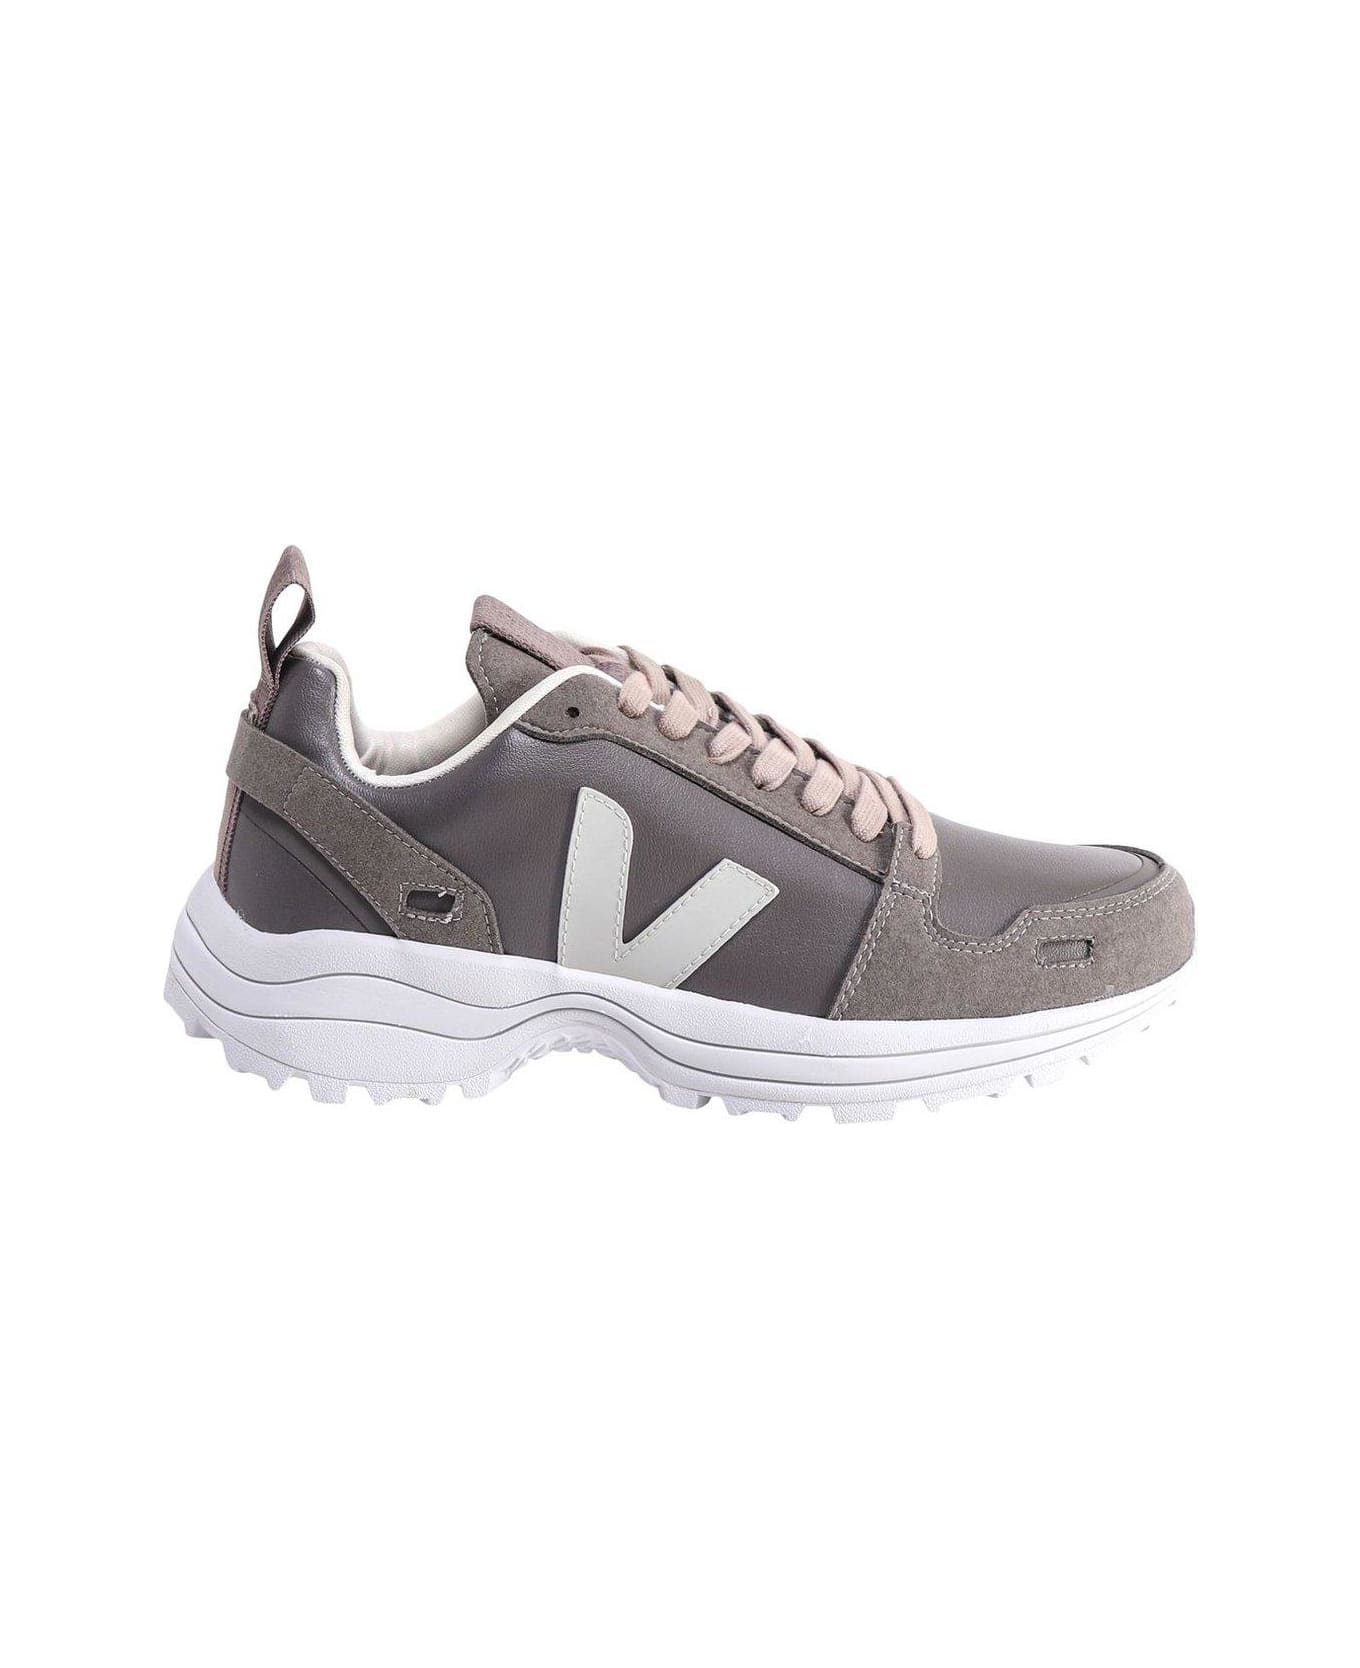 Rick Owens Hiking Style Lace-up Sneakers - Grey